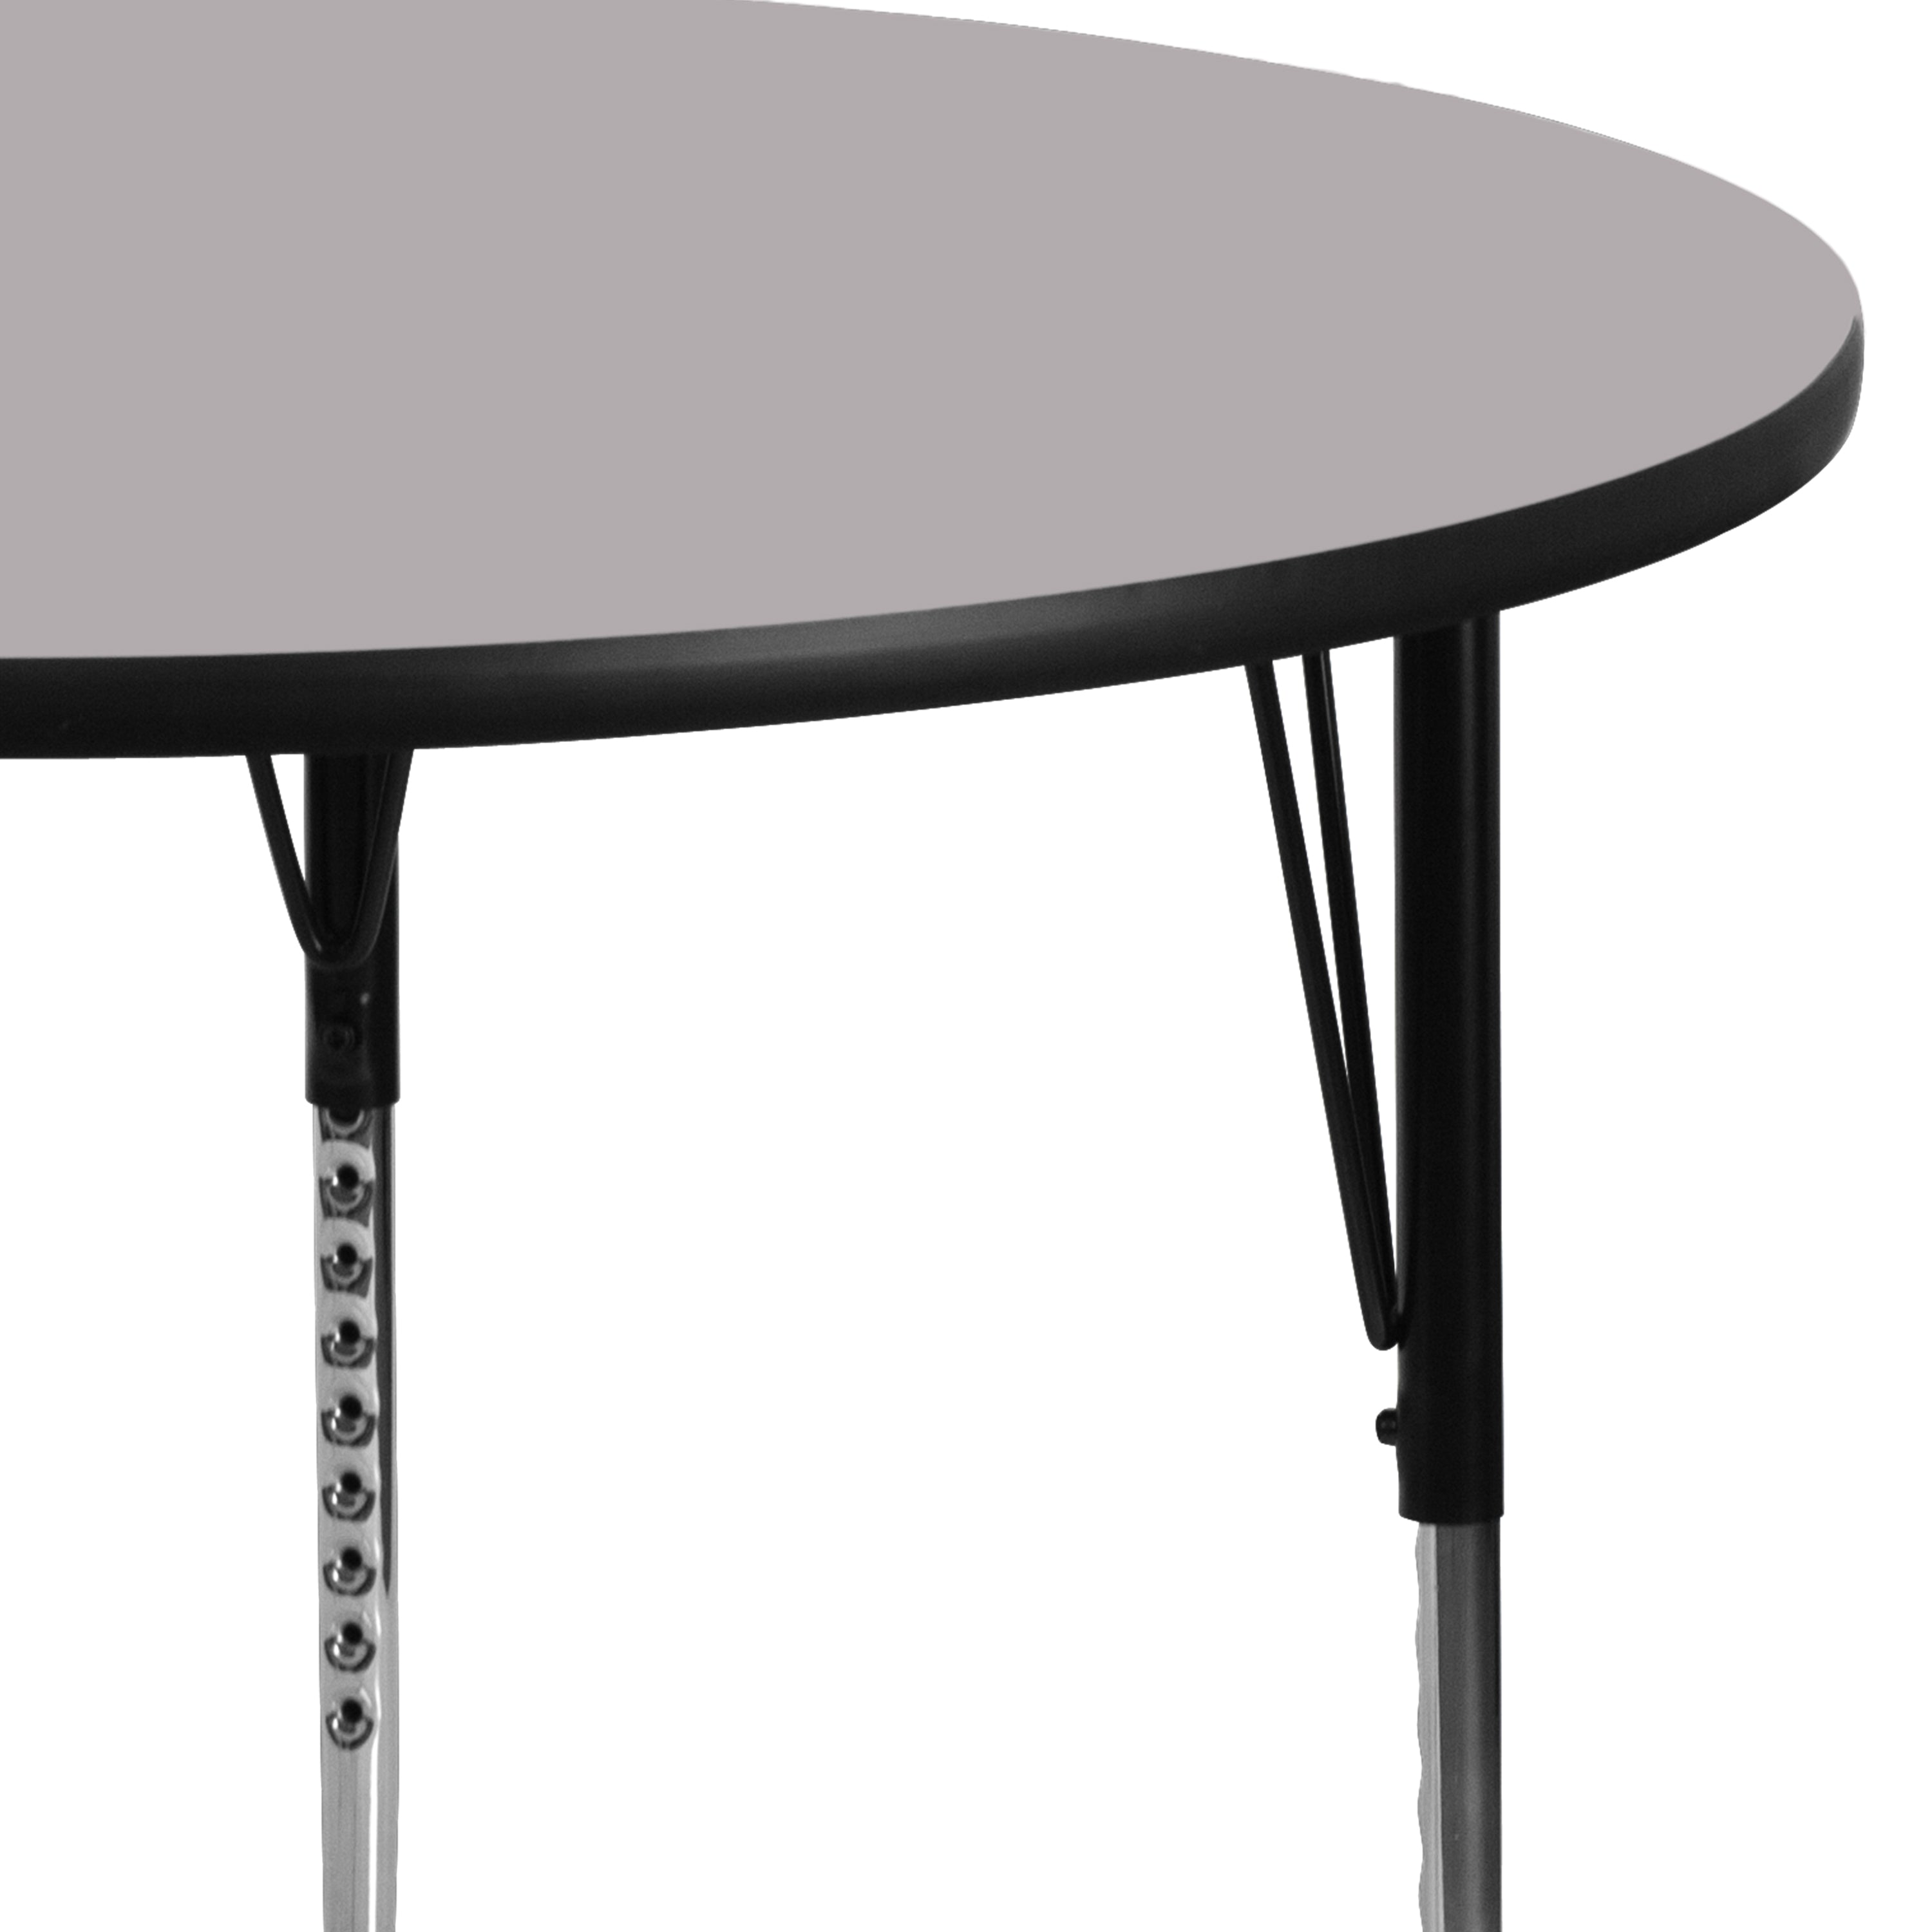 48'' Round Thermal Laminate Activity Table - Standard Height Adjustable Legs-Round Activity Table-Flash Furniture-Wall2Wall Furnishings